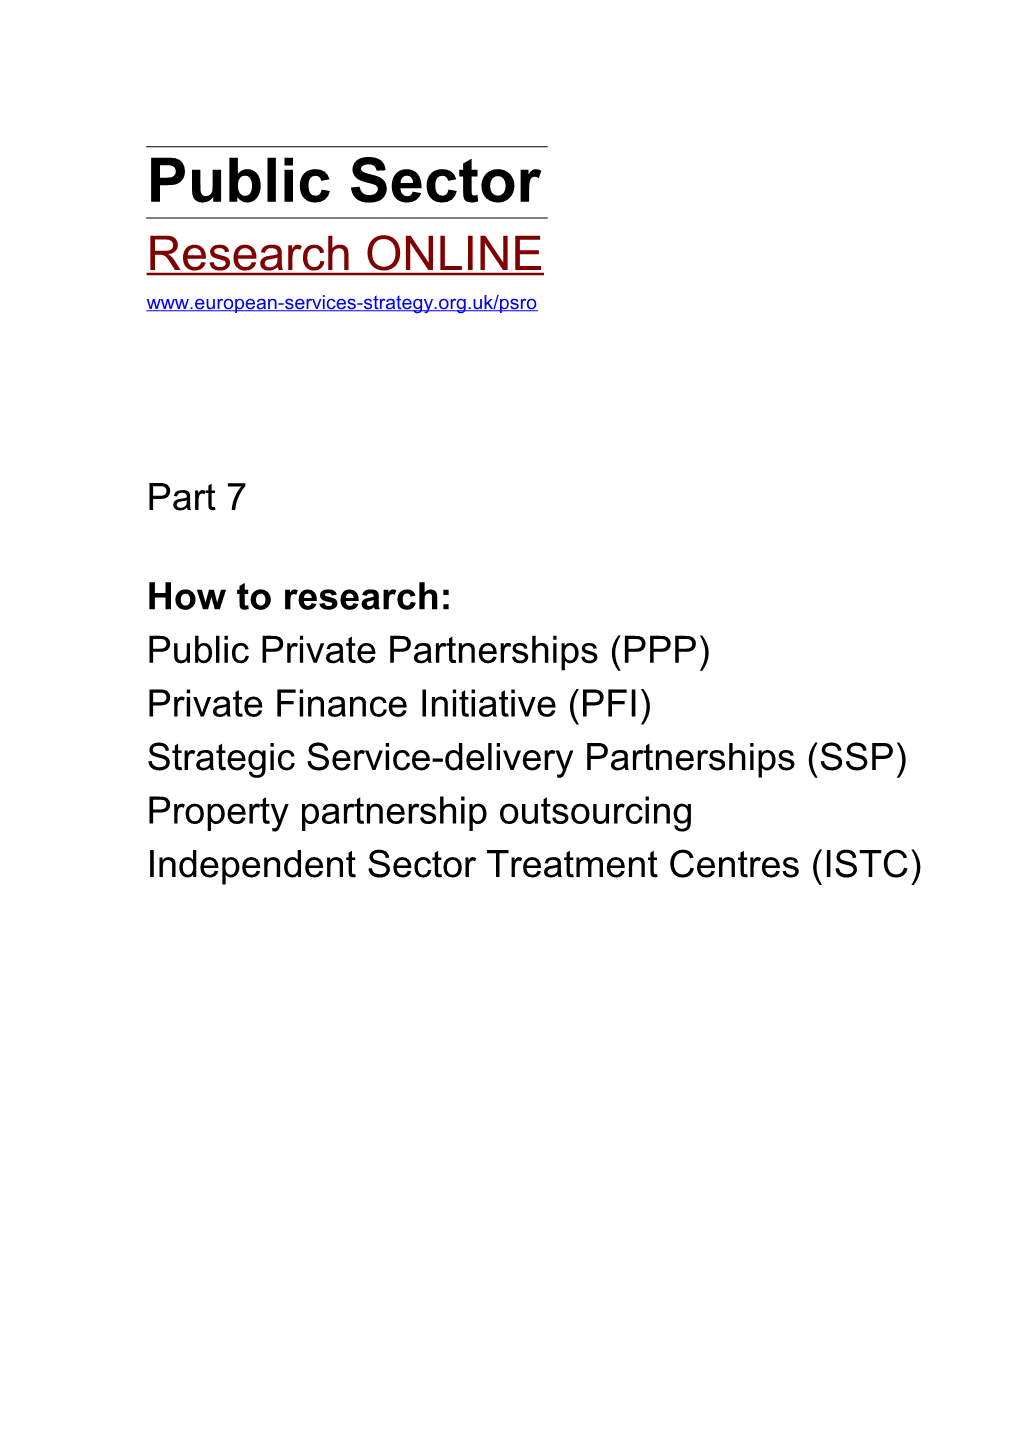 Public Sector Research ONLINE